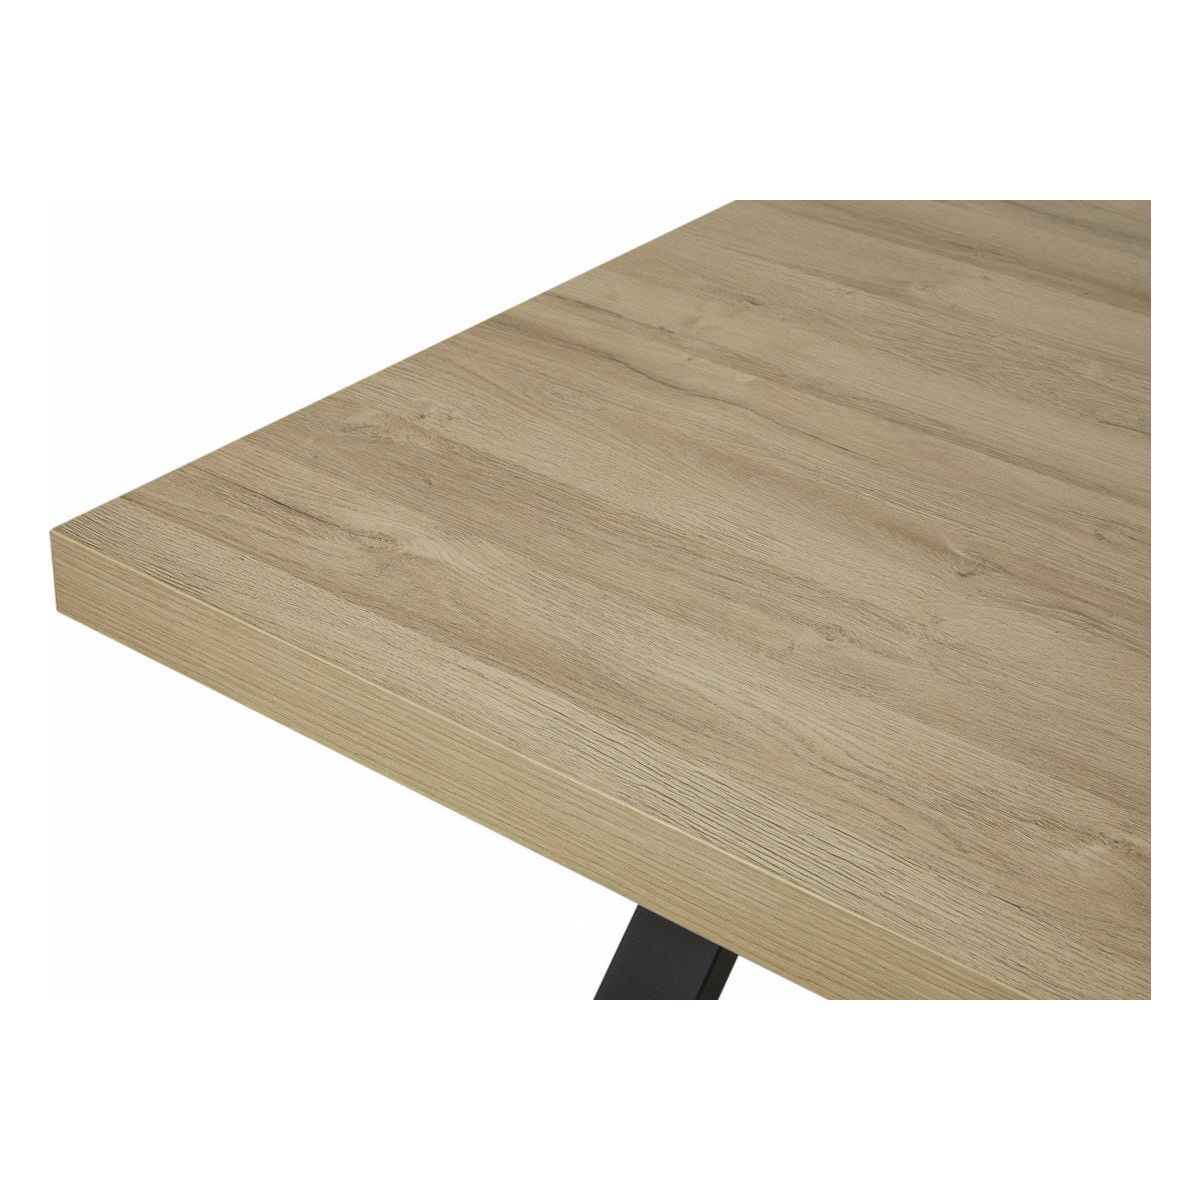 Table | Furniture series Talenso | natural, gray, brown